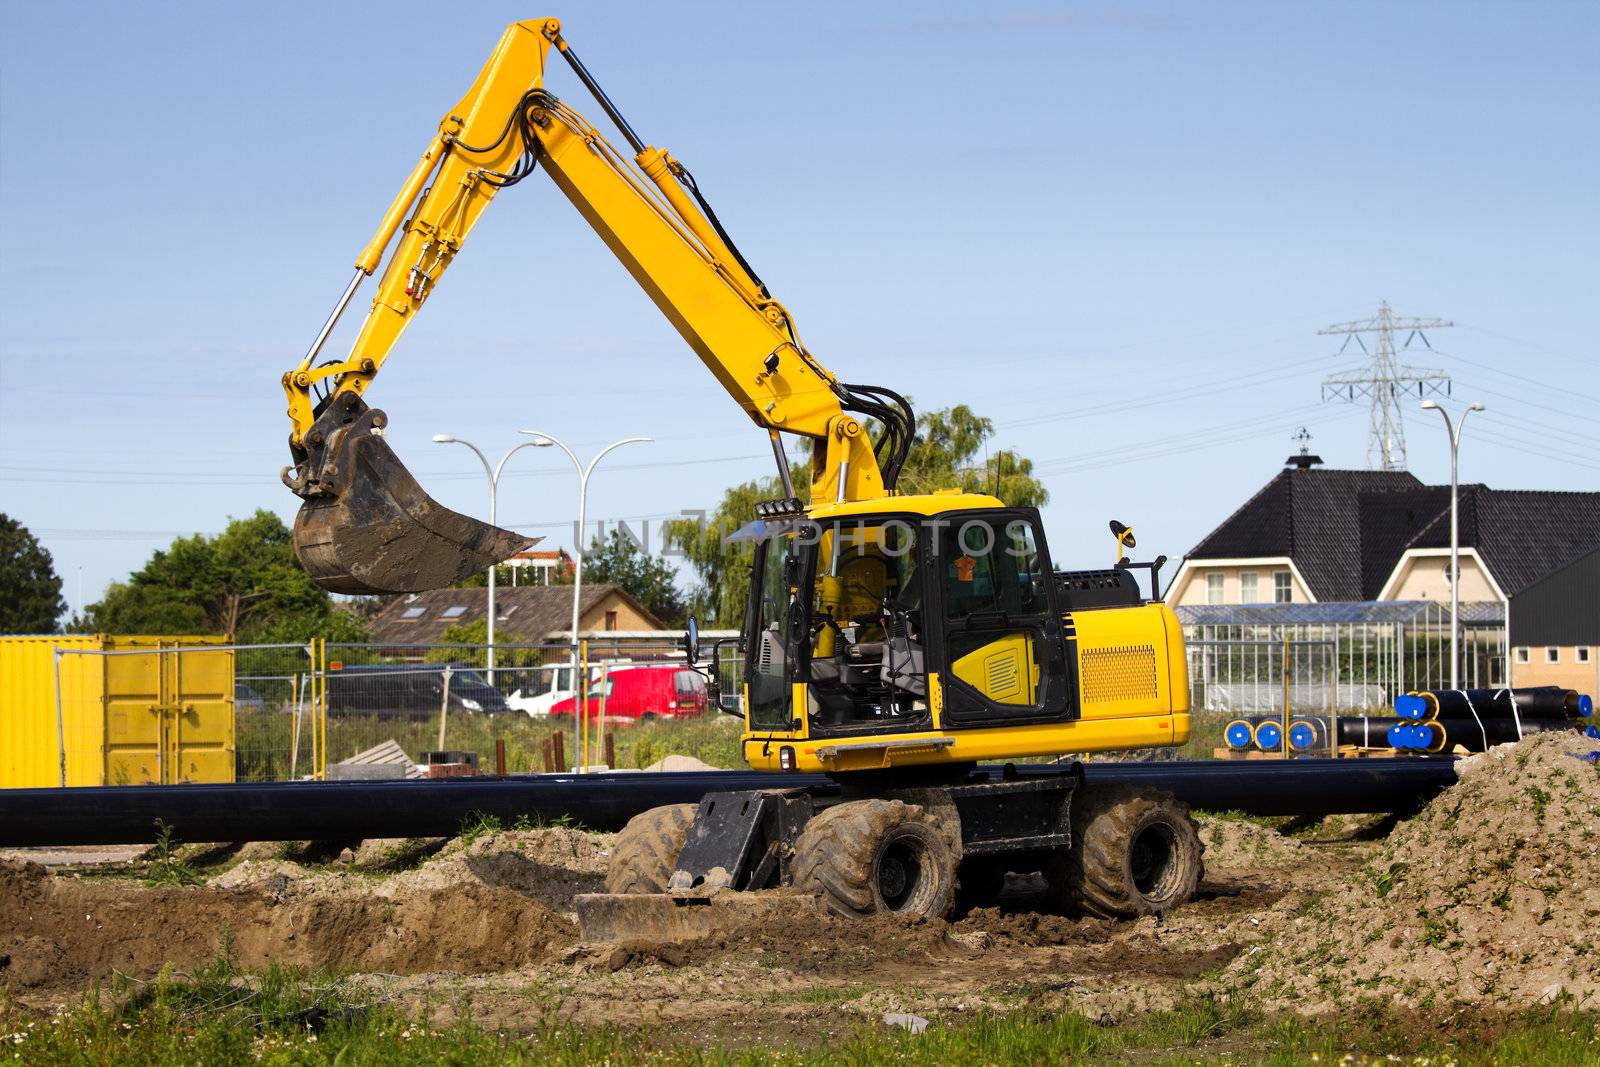 Excavator at work digging up ground for new to build houses - horizontal